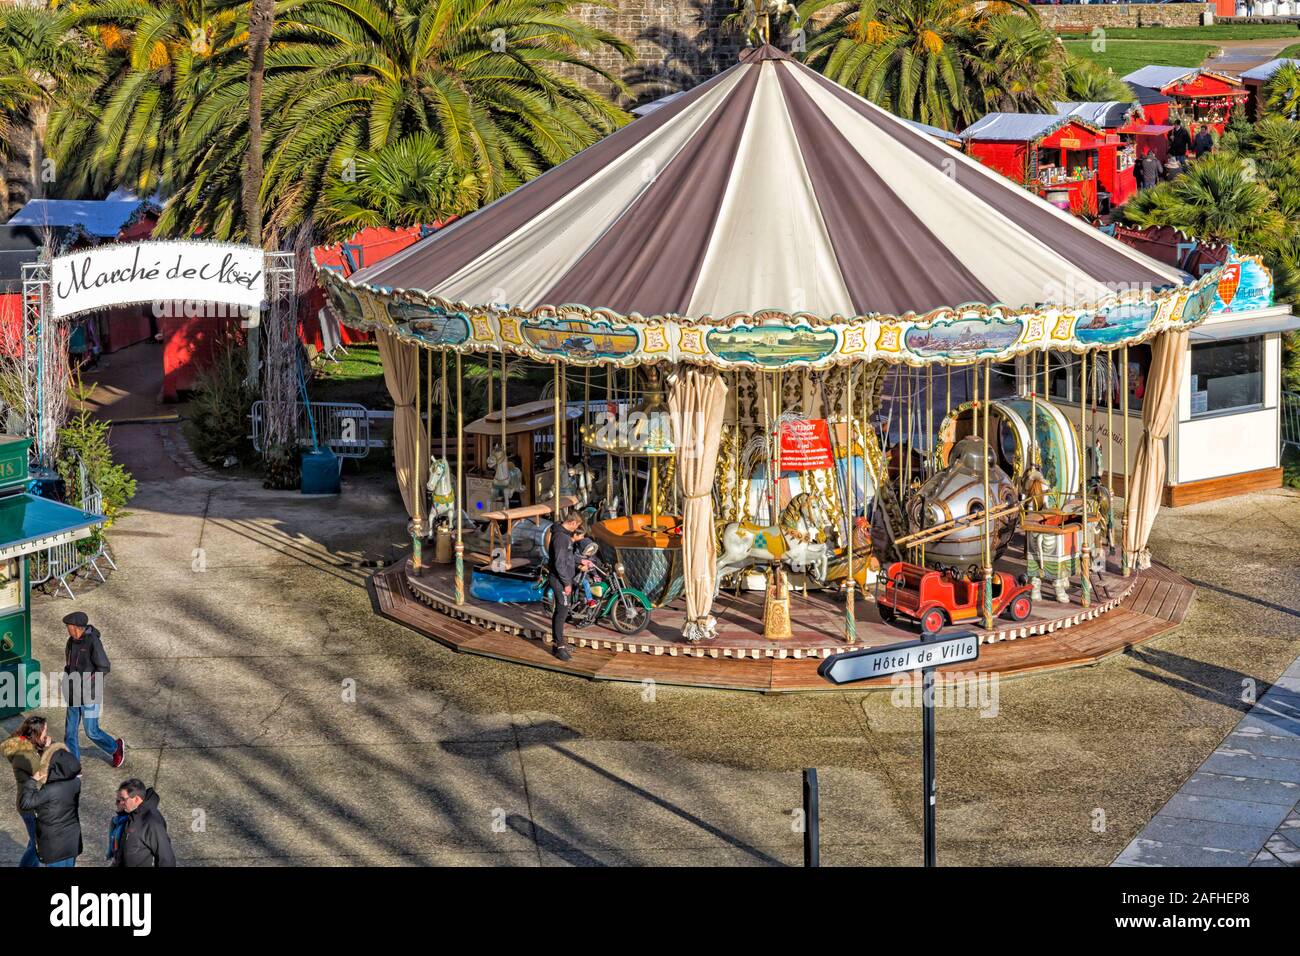 Christmas market and carousel merry-go-round at St Malo, Saint Malo, Brittany, France in December Stock Photo